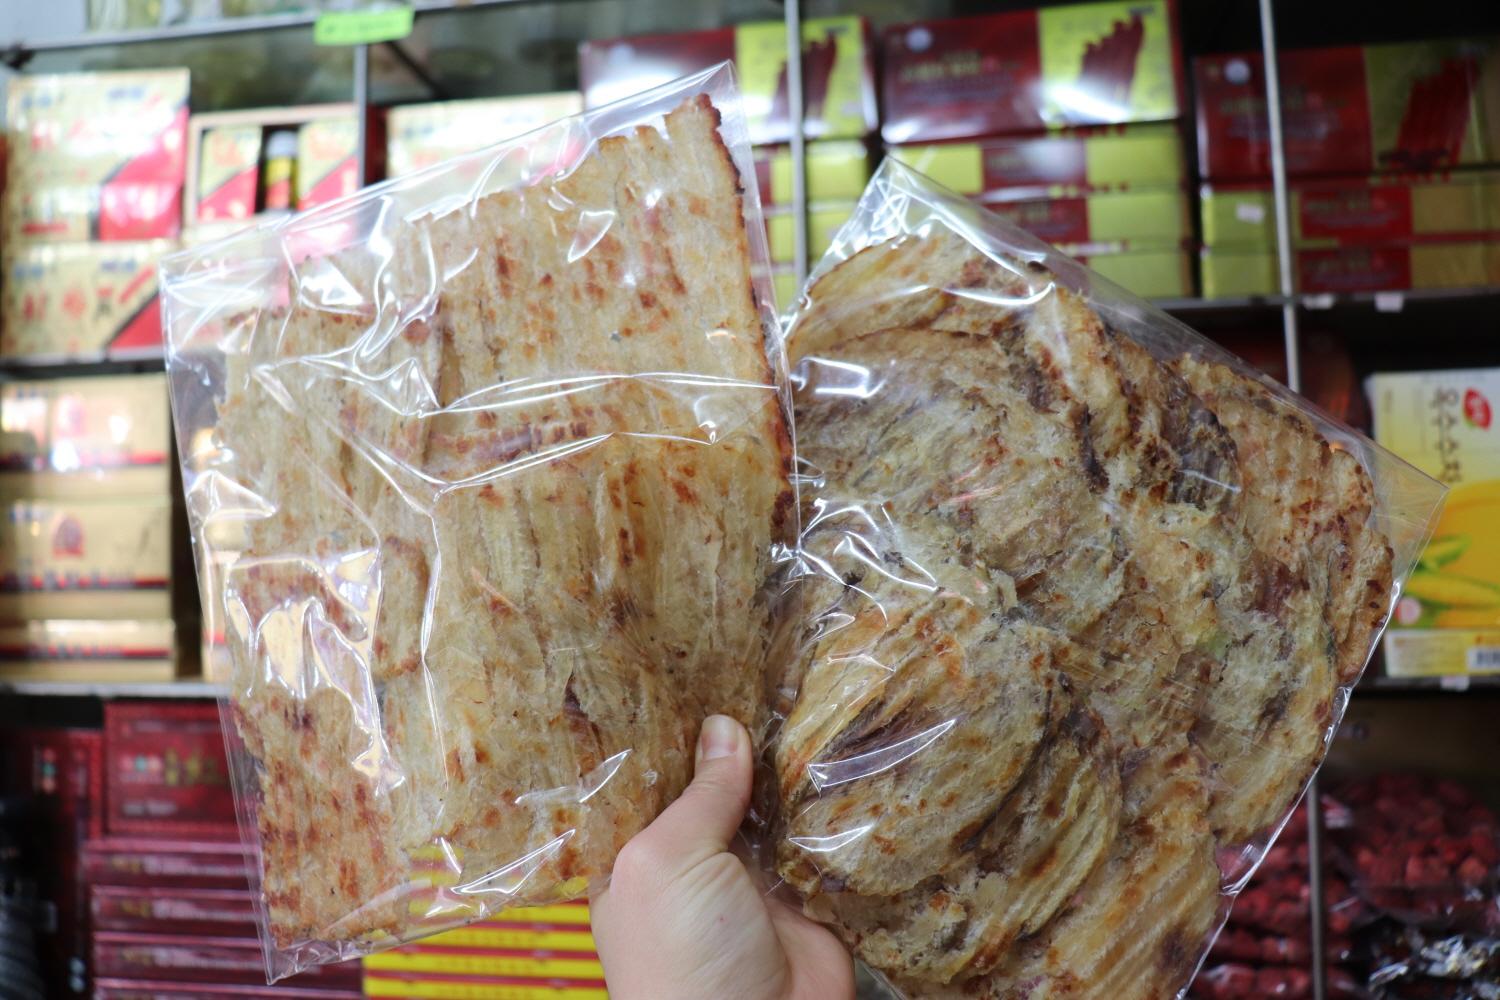 A traditional Korean comfort food: Dried cuttlefish from Changansangsa, wrapped in plastic&wood. A popular staple cuisine ingredient.